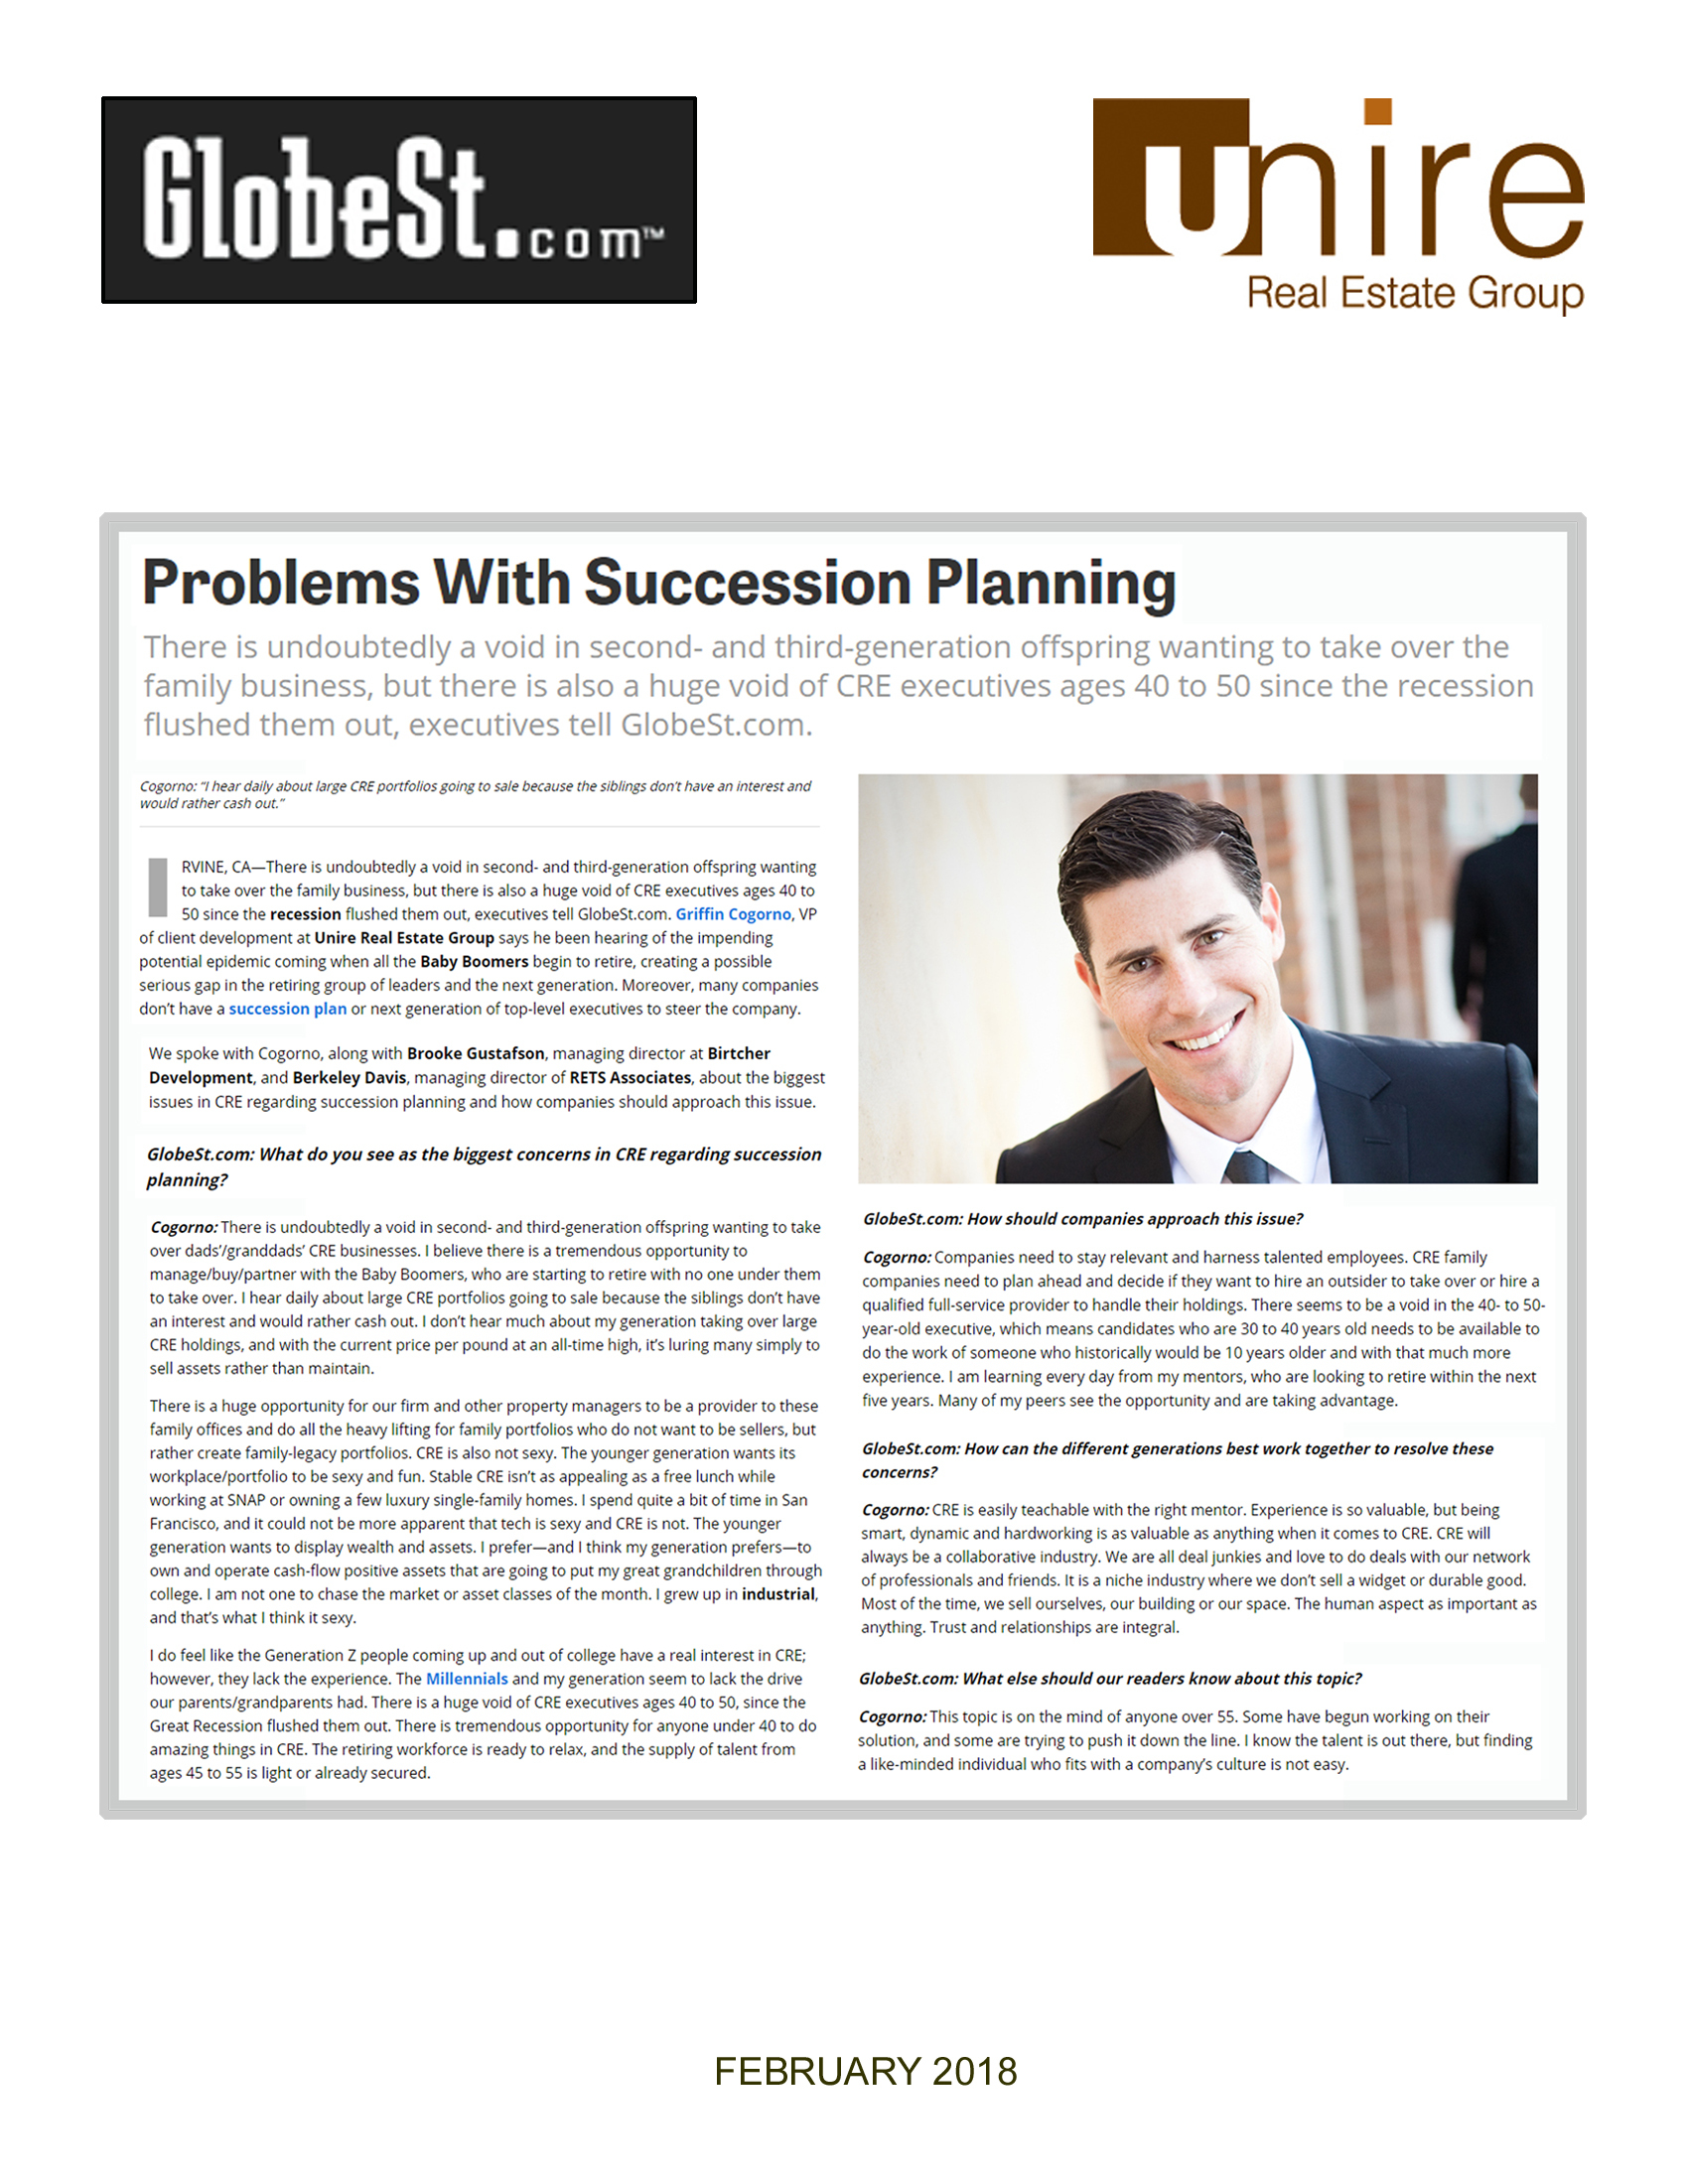 Problems with Succession Planning - GlobeSt.com interview